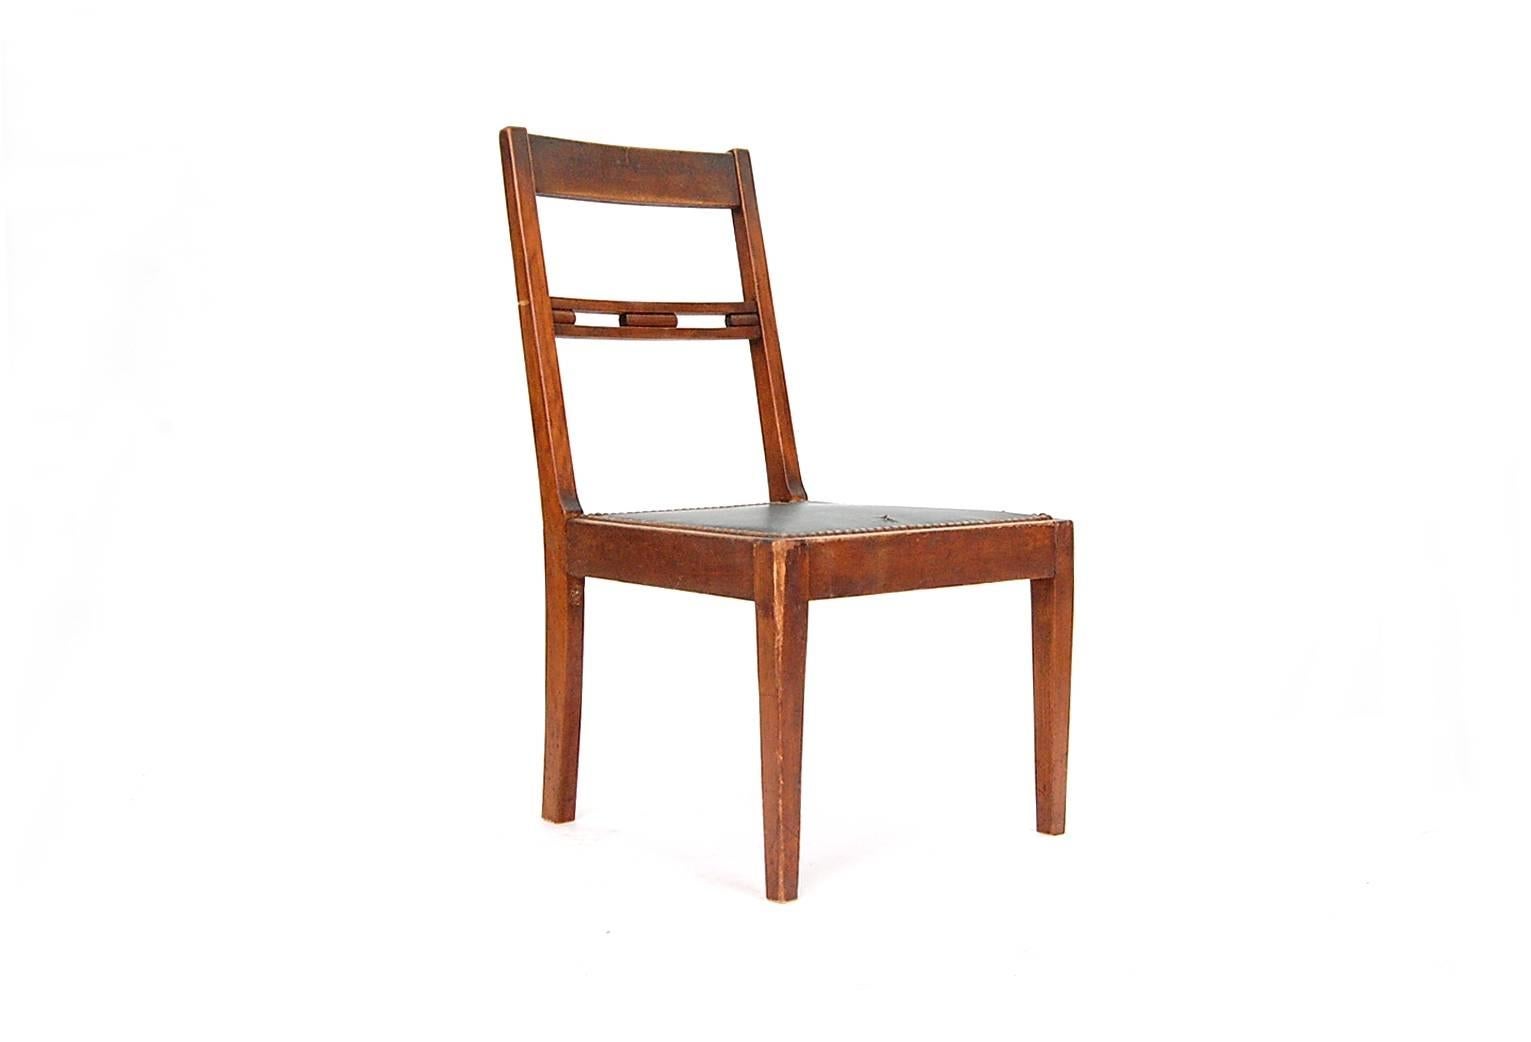 Very rare chair by Francis H. Bacon (1856-1940), circa 1910-1915. The splat, although it appears to be five elements, is actually one exquisitely carved piece of walnut. Although this chair is not true arts and crafts, I would definitely say that